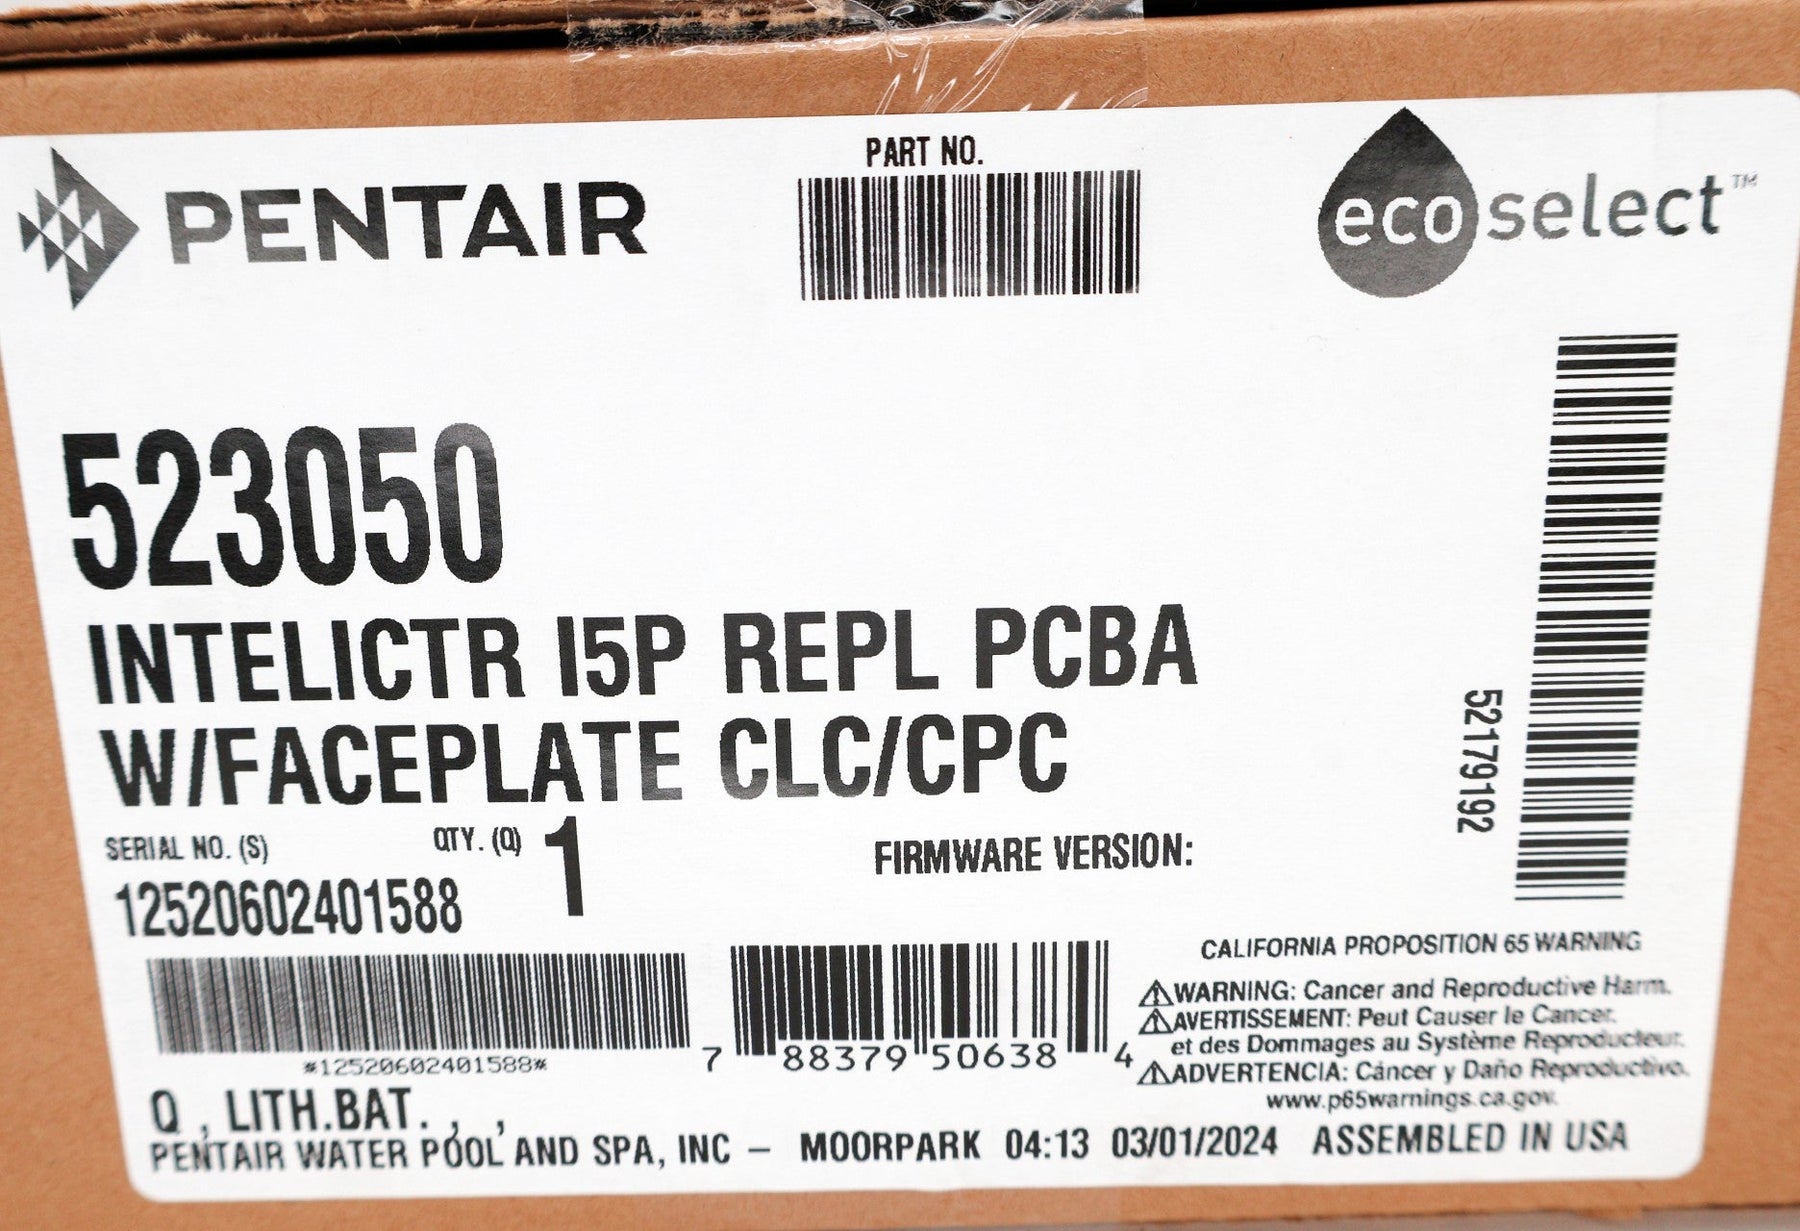 Pentair I5P Replacement PCBA w/ Faceplate 523050 - Pool Automation - img-5